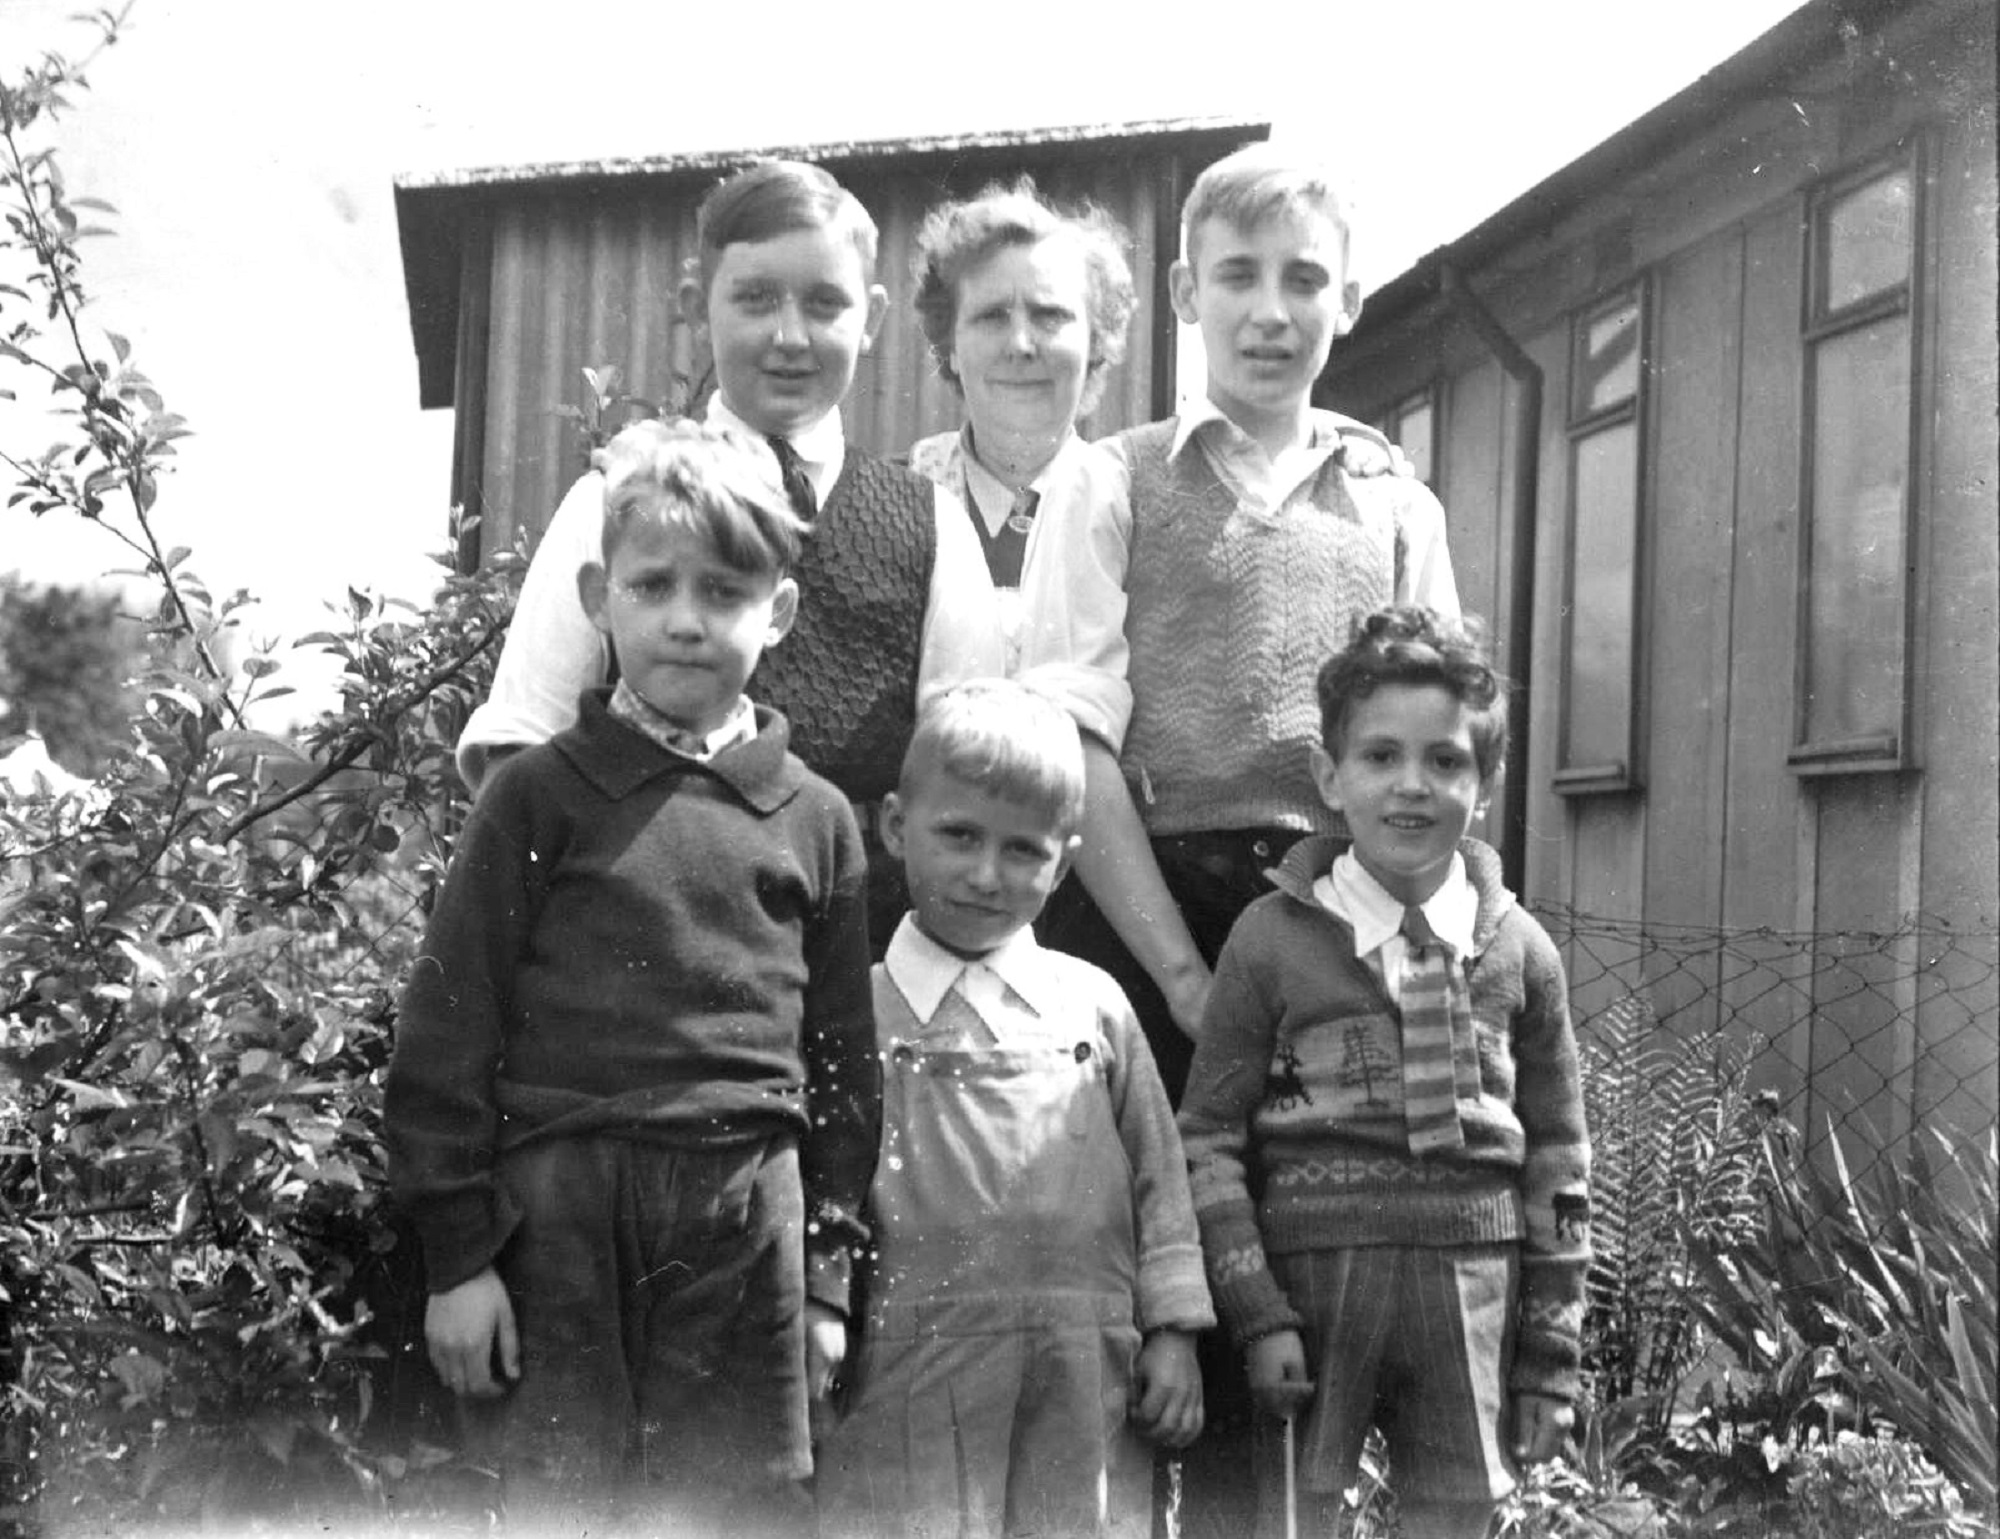 John's cousin Mike left, his Mum and brother Ernie. John is front left, Roy Powell in the middle and Richard Davies right. Reaston Street, London SE14